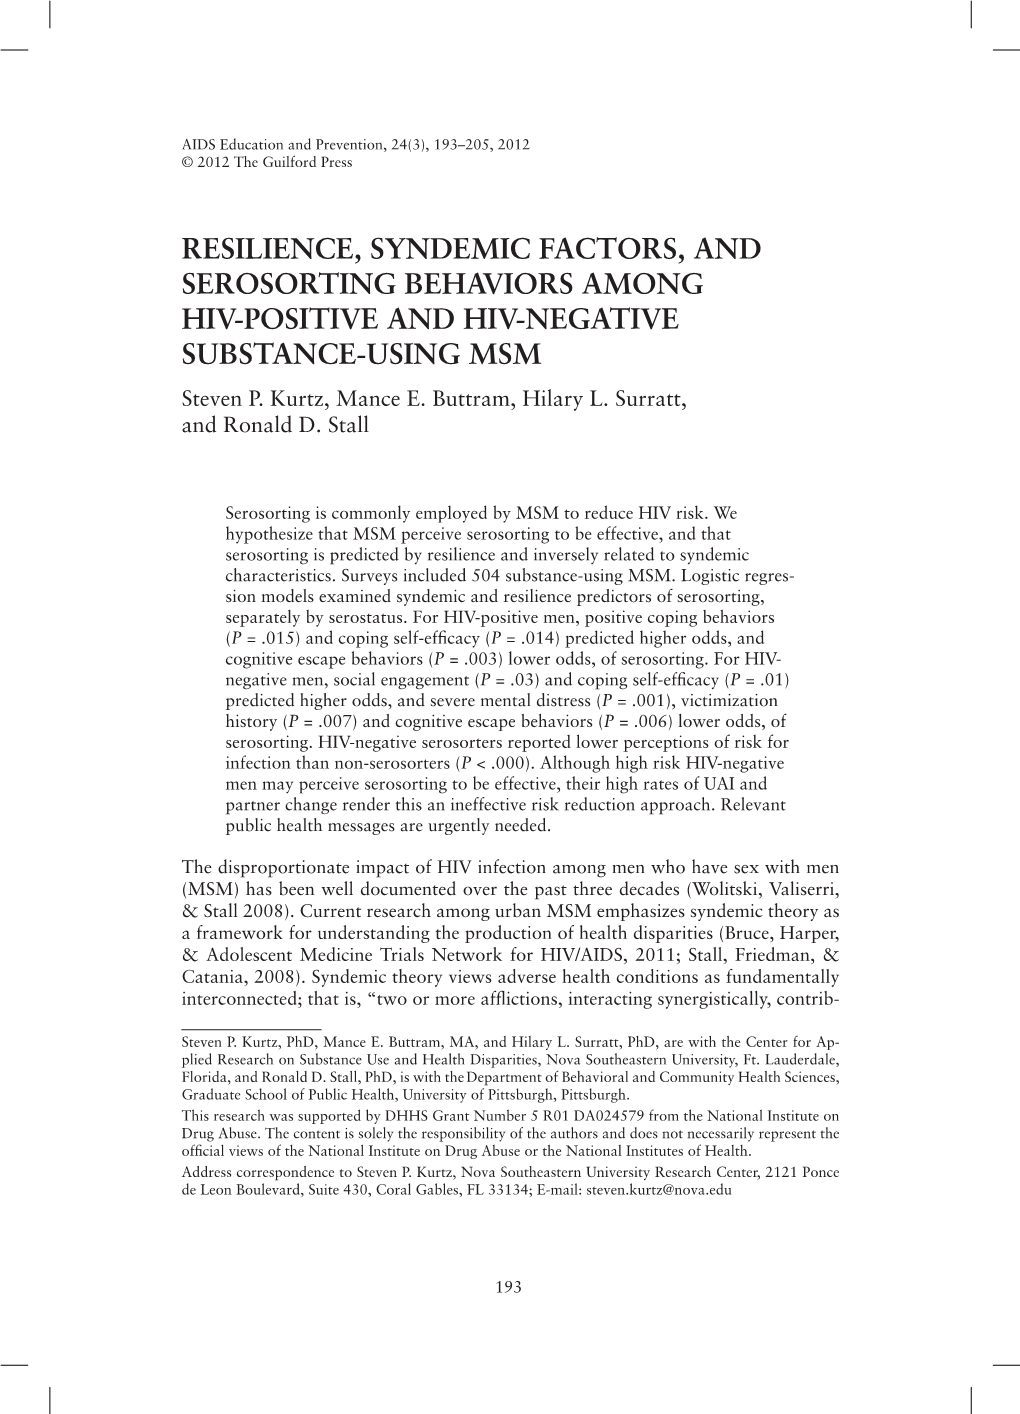 Resilience, Syndemic Factors, and Serosorting Behaviors Among HIV-Positive and HIV-Negative Substance-Using MSM Steven P